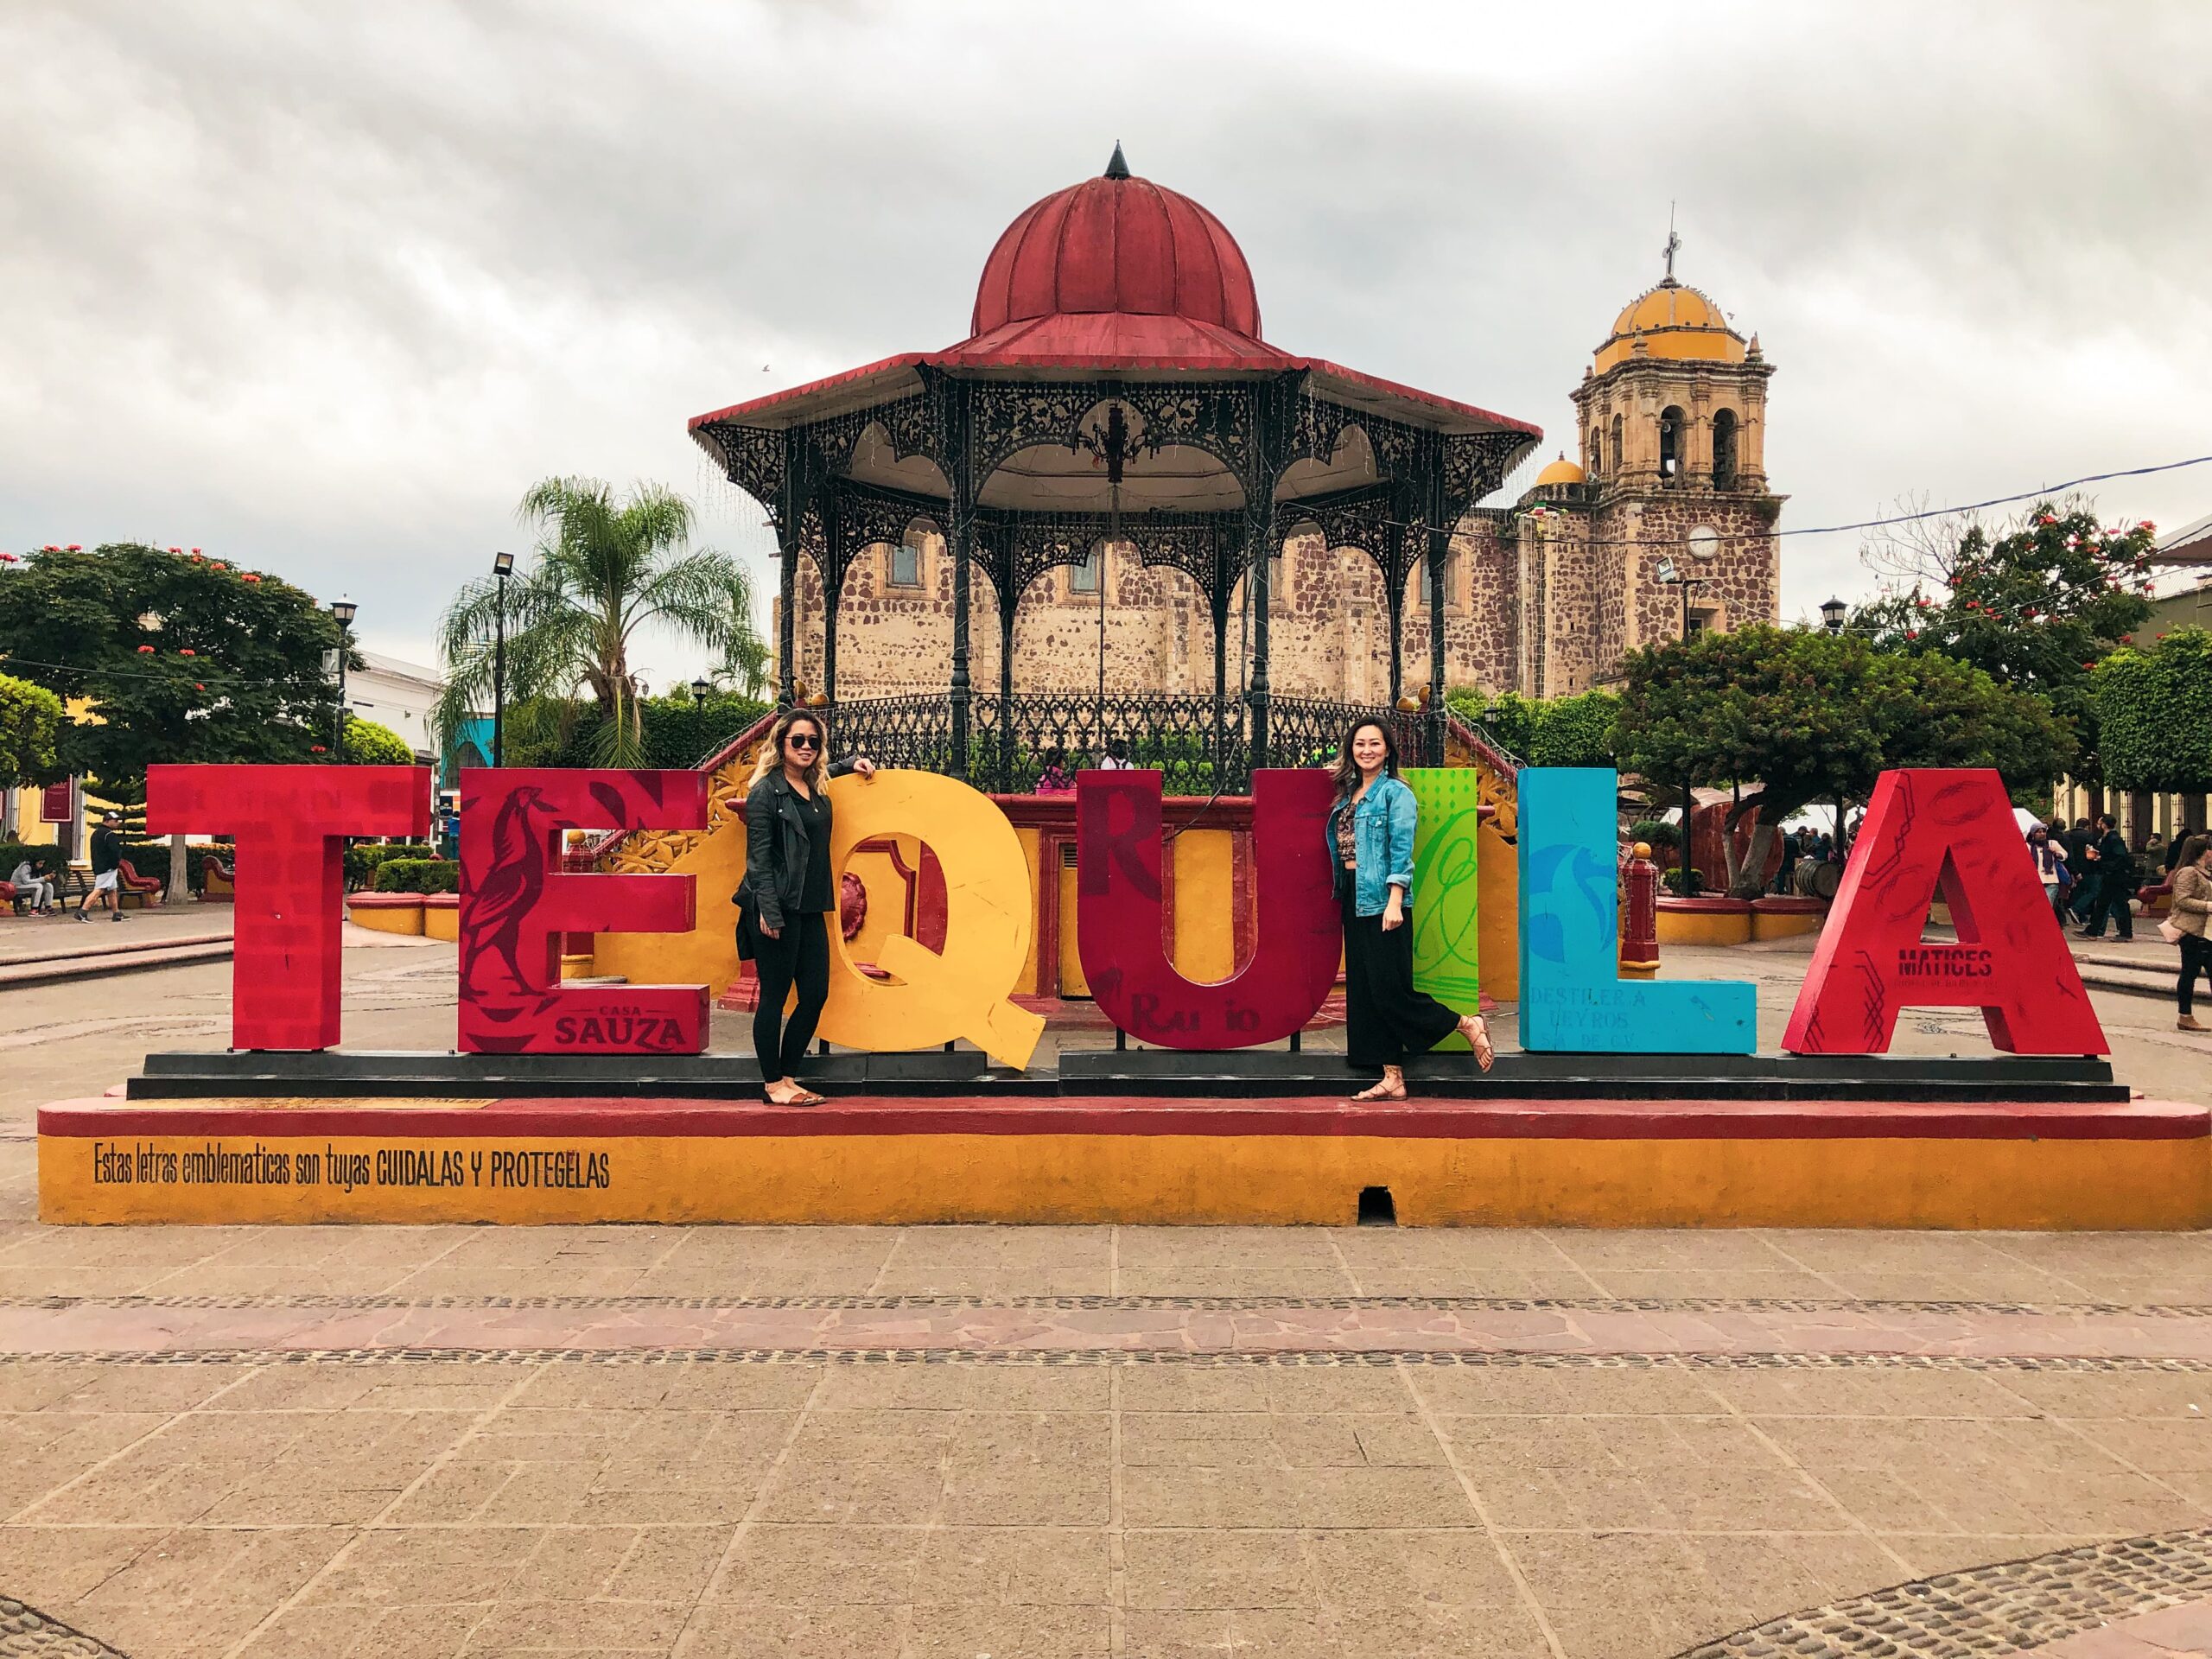 image of TEQUILA sign in Tequila 